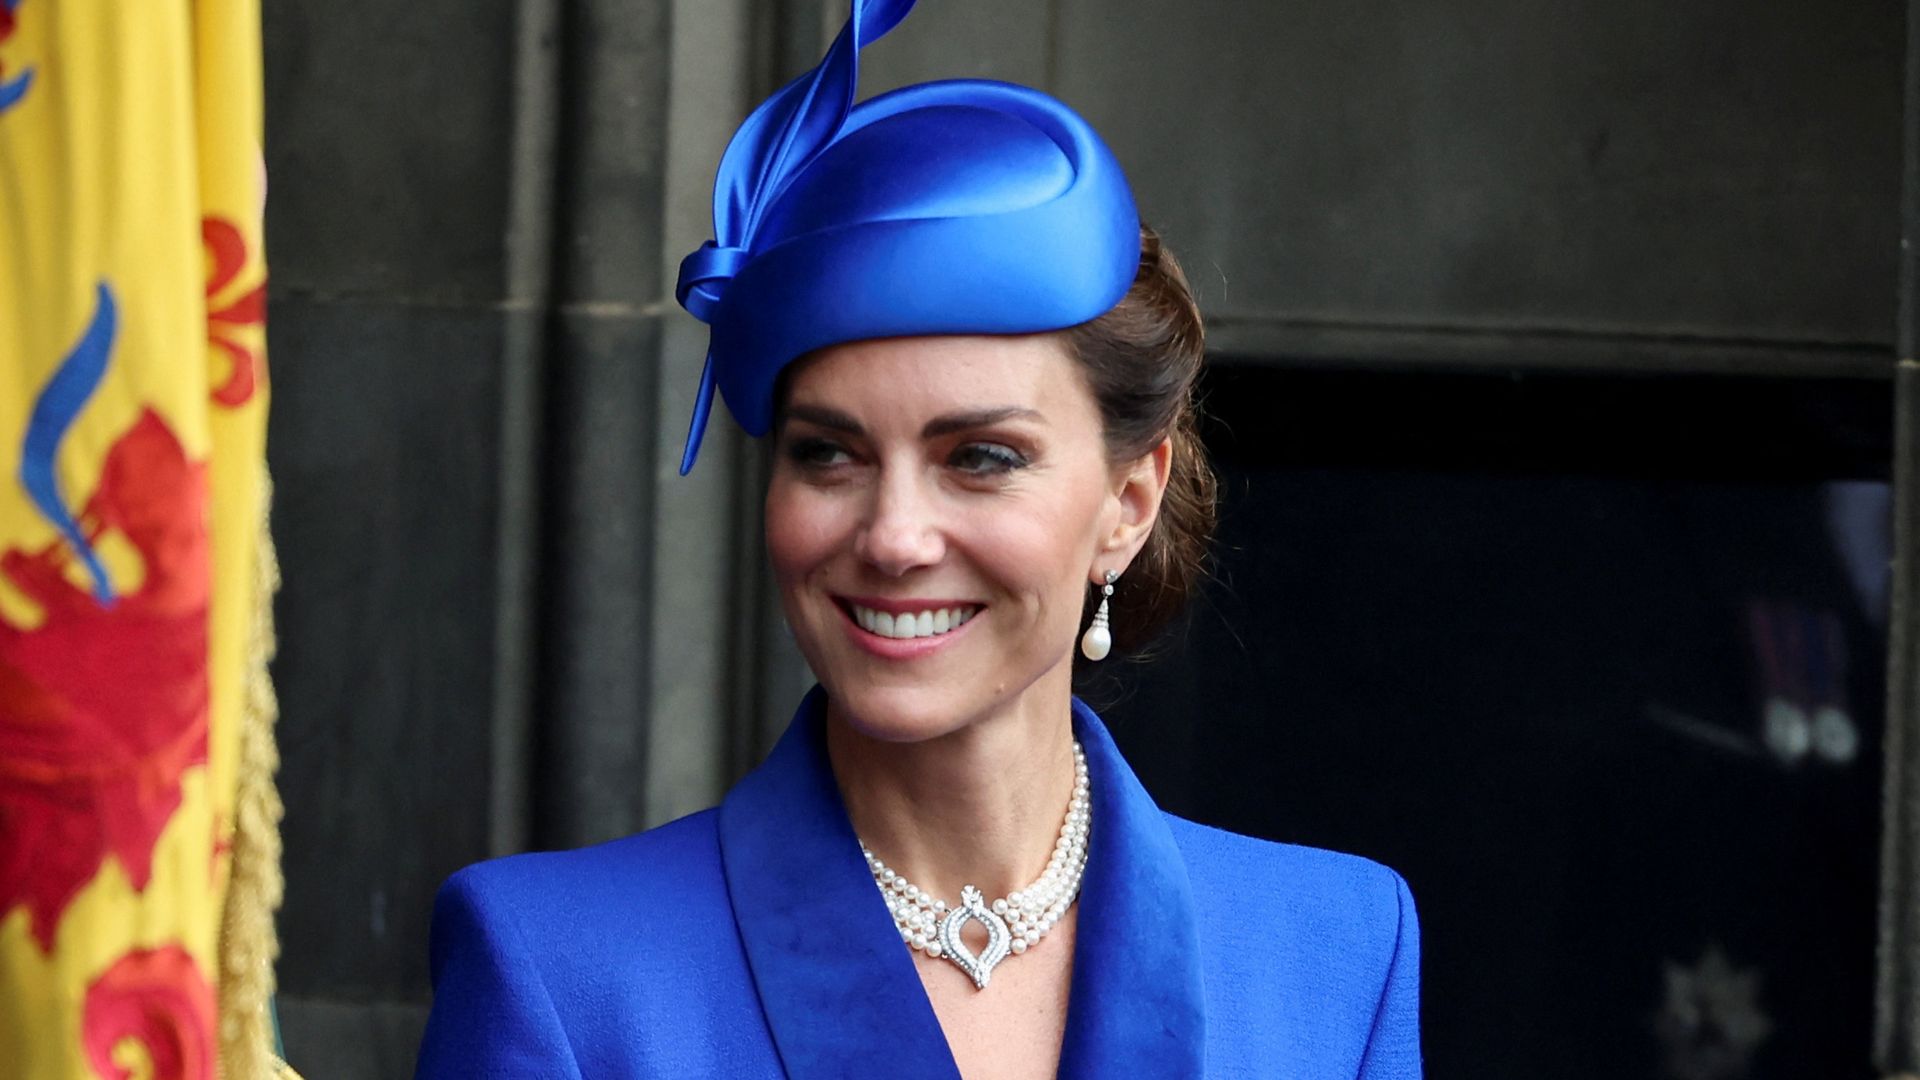 This is the real reason Princess Kate wore blue to the Scottish Coronation